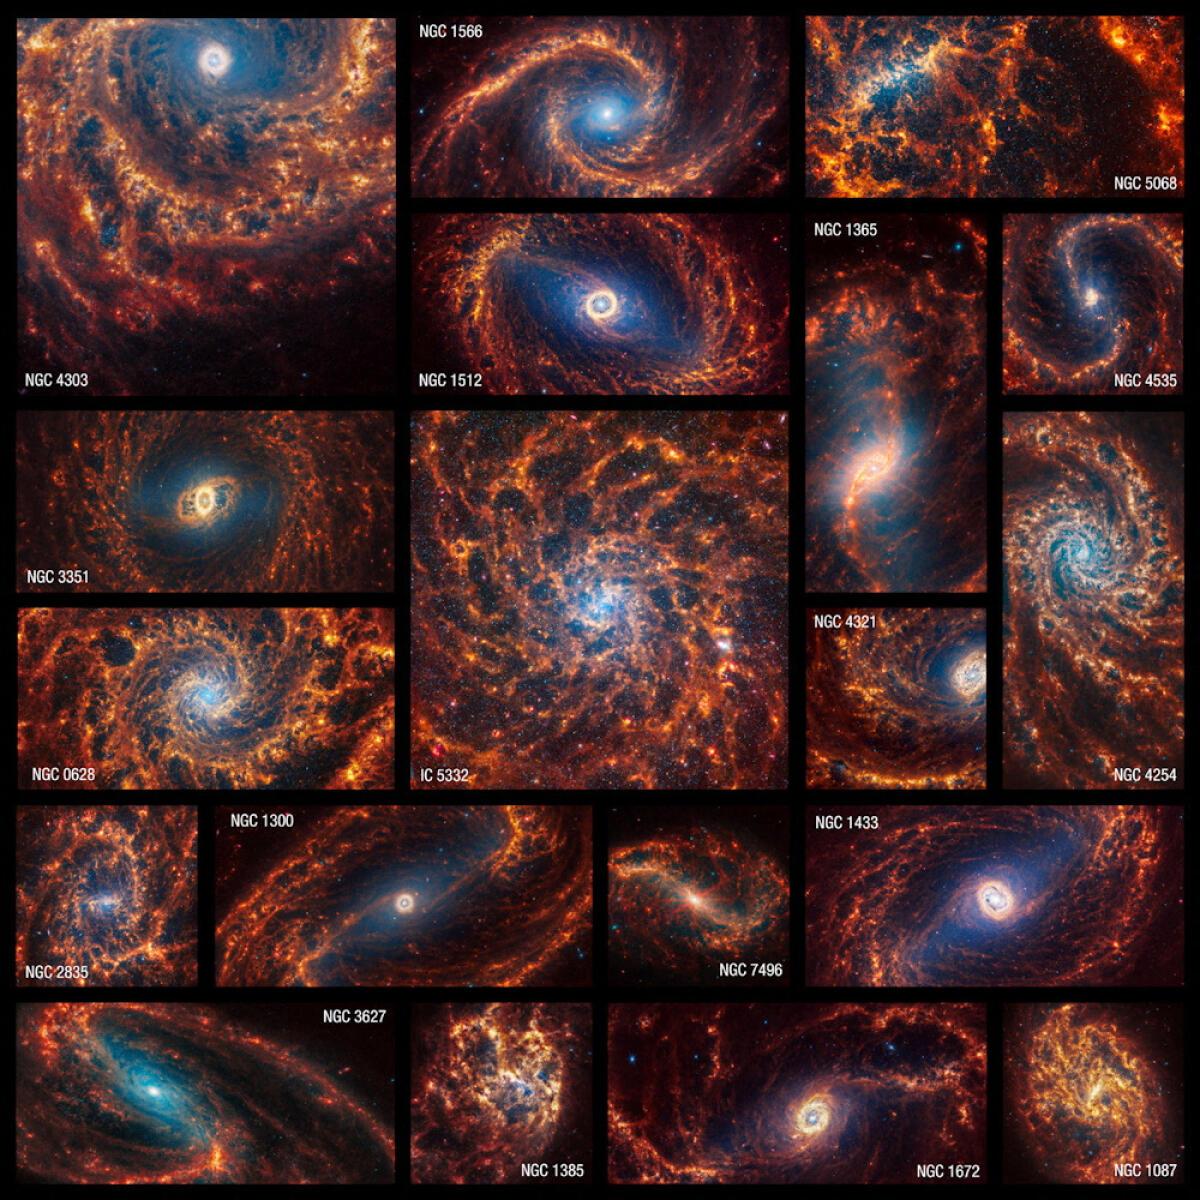 Webb telescope captures ‘stunning’ images of 19 spiral galaxies - The Hindu